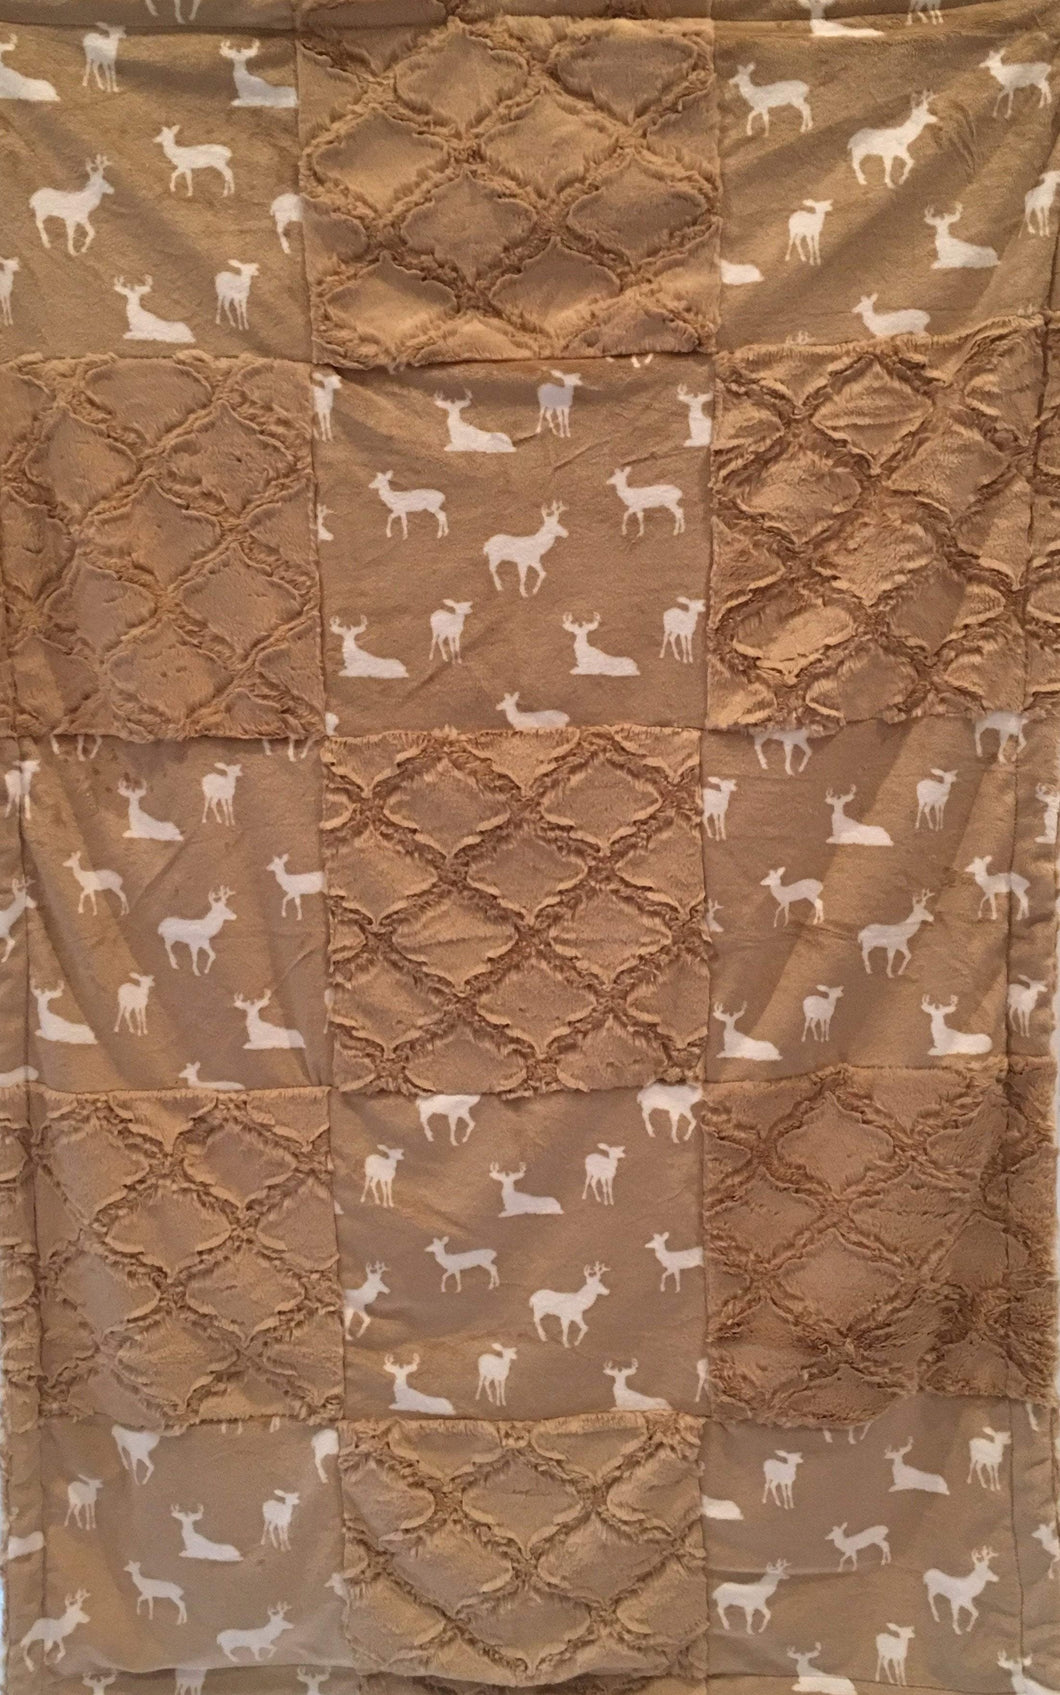 Patchwork Style Blanket: Luxe Cuddle Deer to Me in Sand Patchwork on Luxe Cuddle Lattice Sand